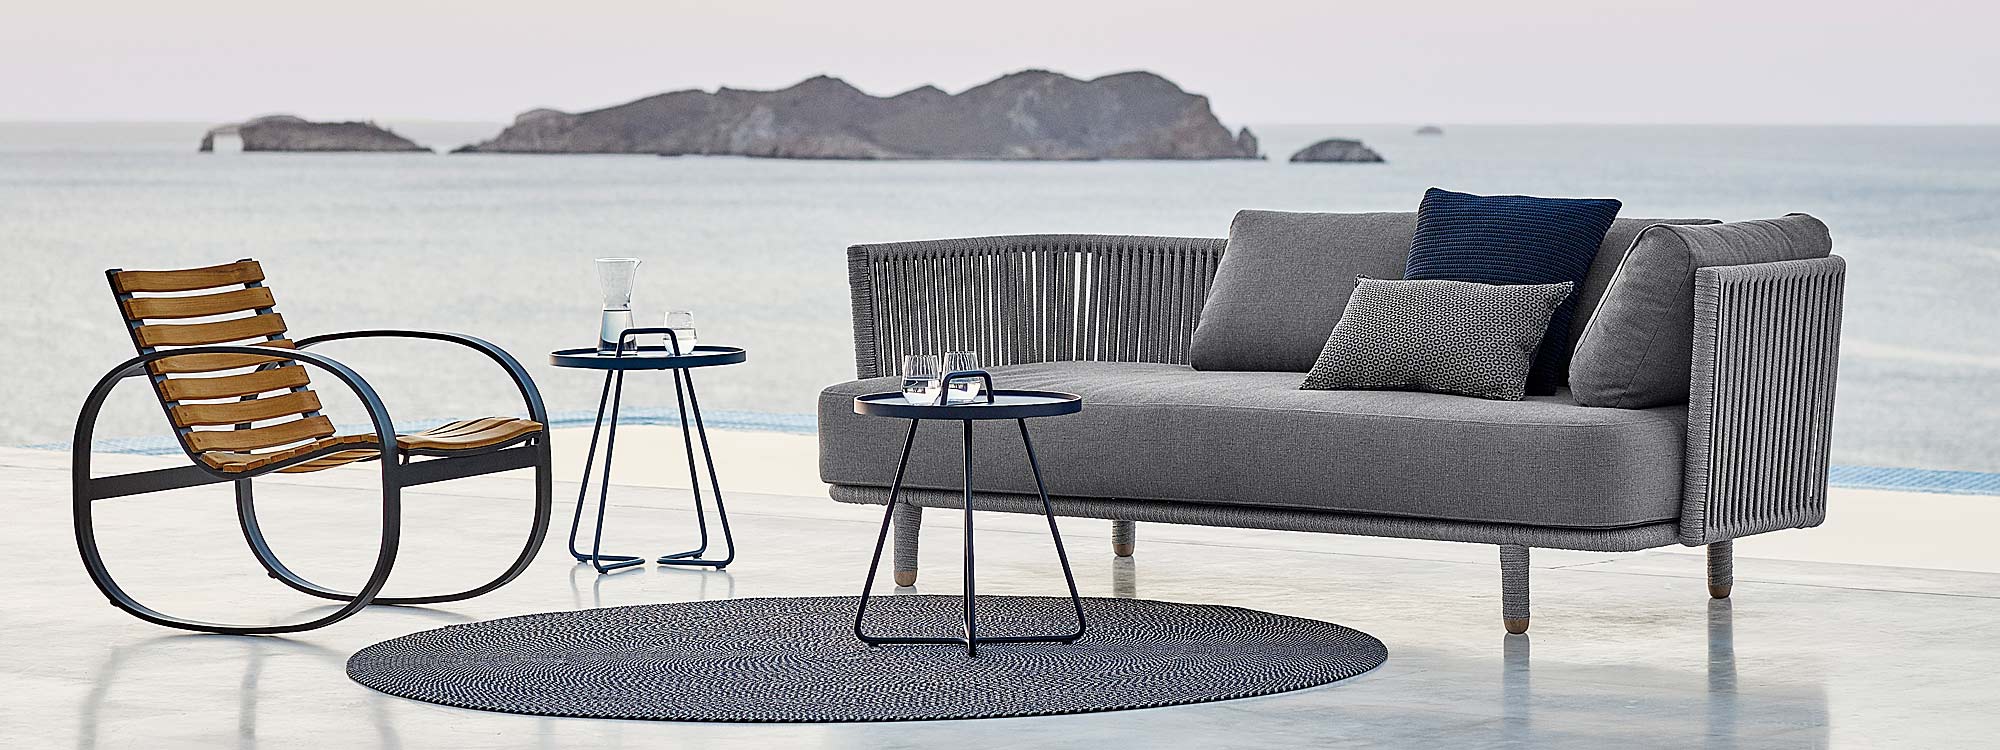 Moments modern garden sofas is a luxury outdoor lounge set in high quality garden furniture materials by Cane-line all-weather outdoor furniture